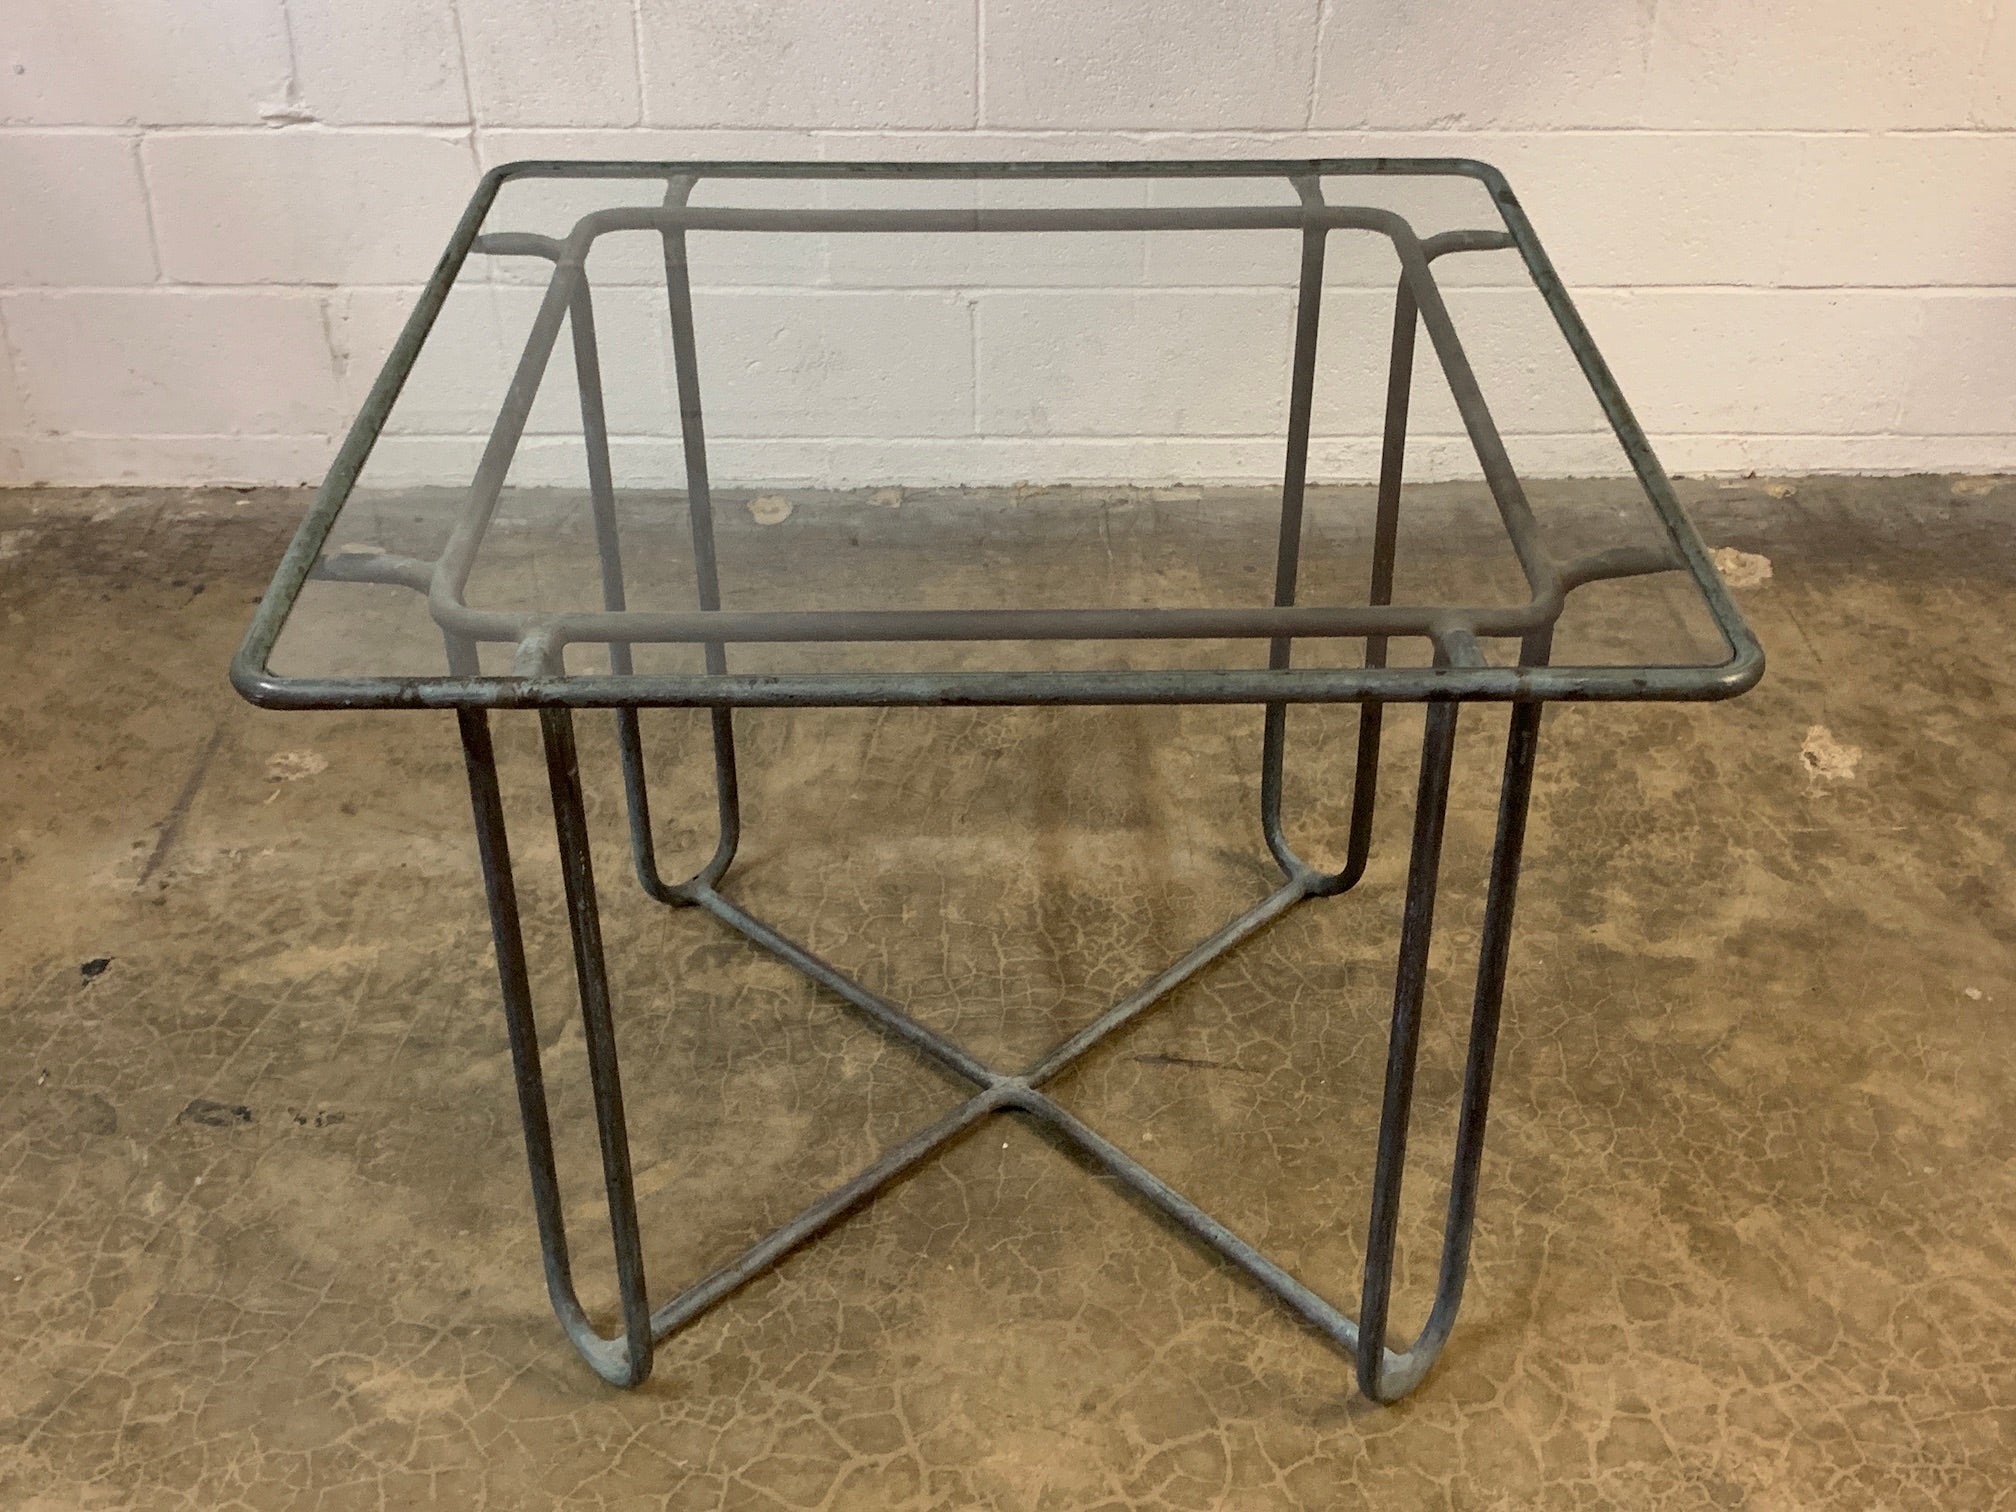 A beautifully patinated bronze outdoor table designed by Walter Lamb.